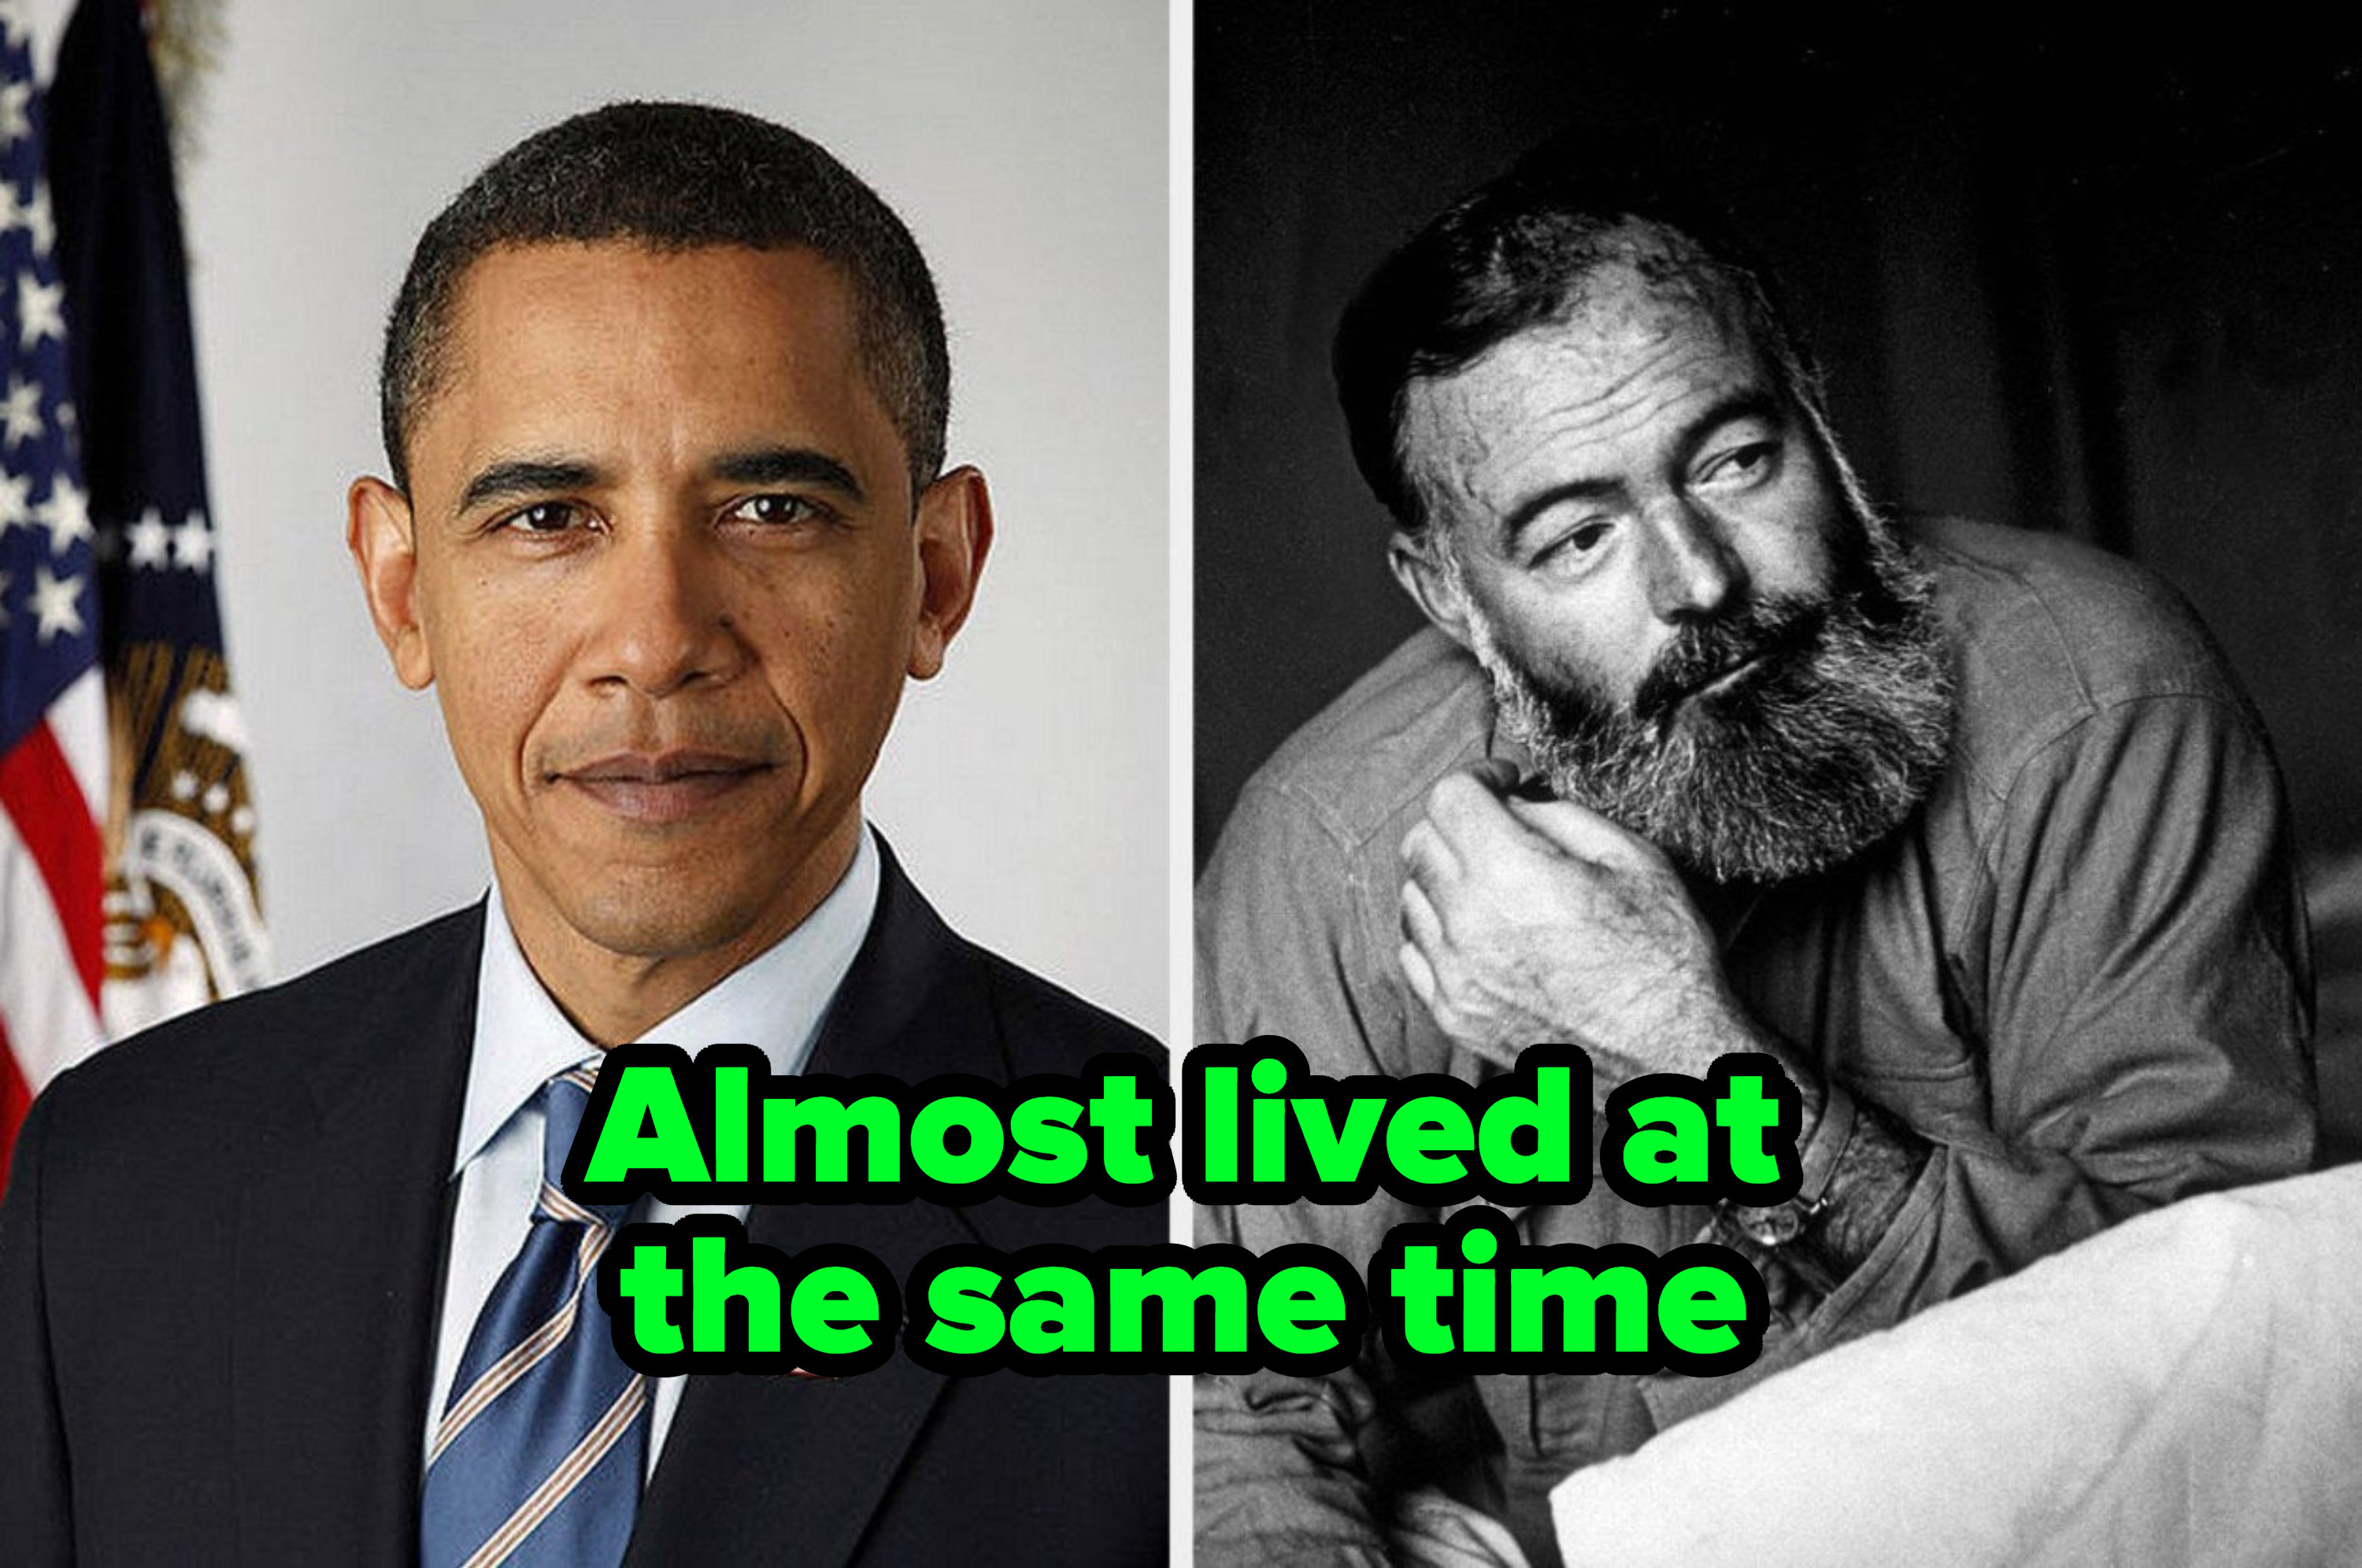 &quot;Almost lived at the same time&quot; written over Barack Obama and Ernest Hemingway